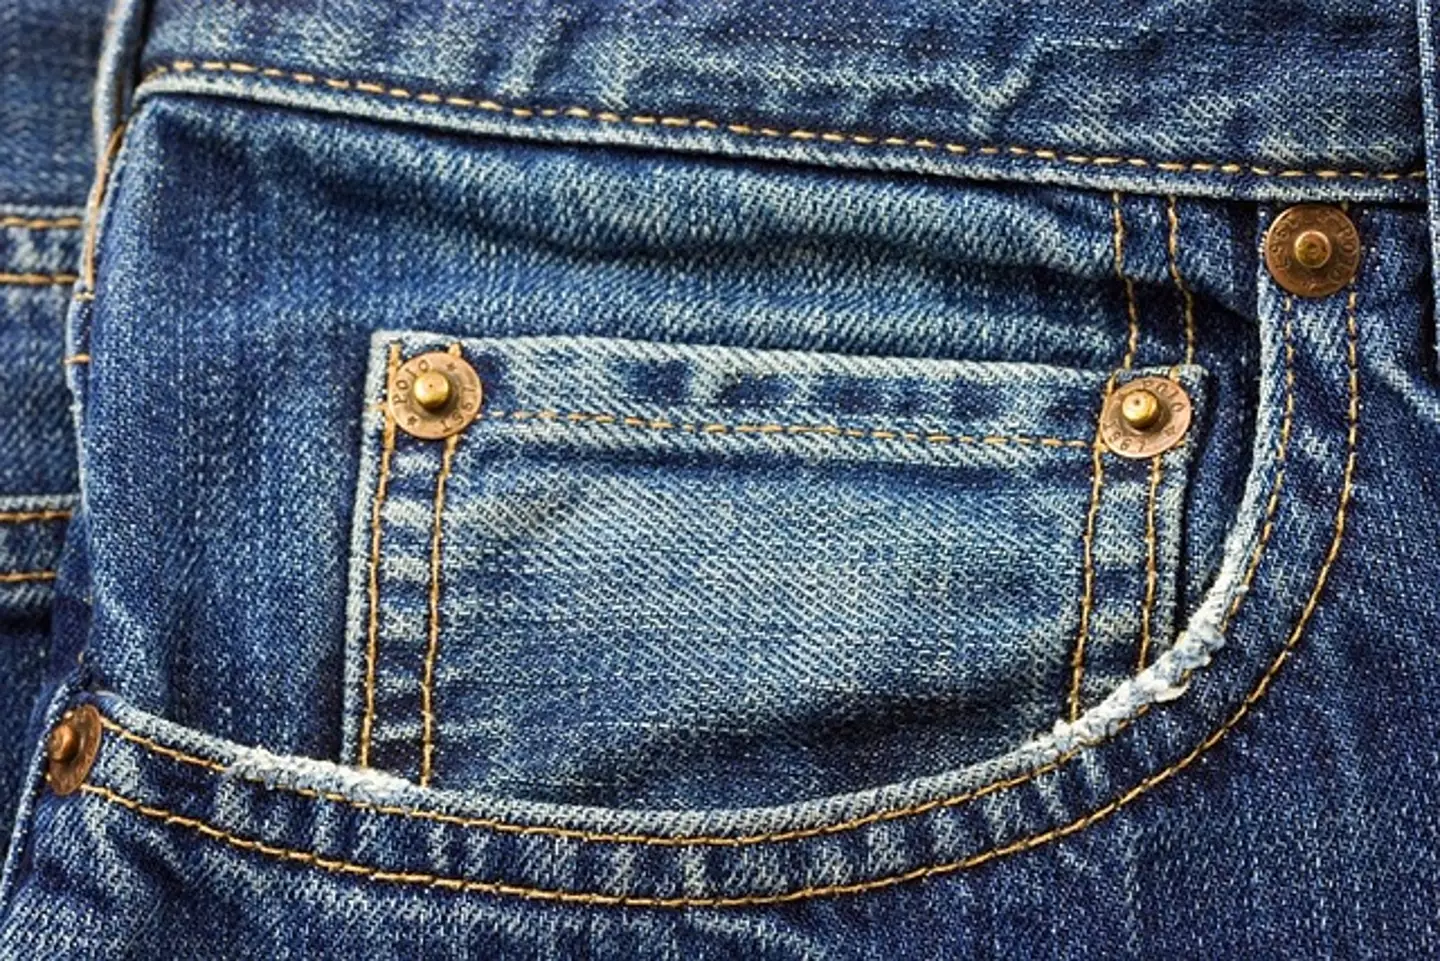 Most jean pockets feature the studs.